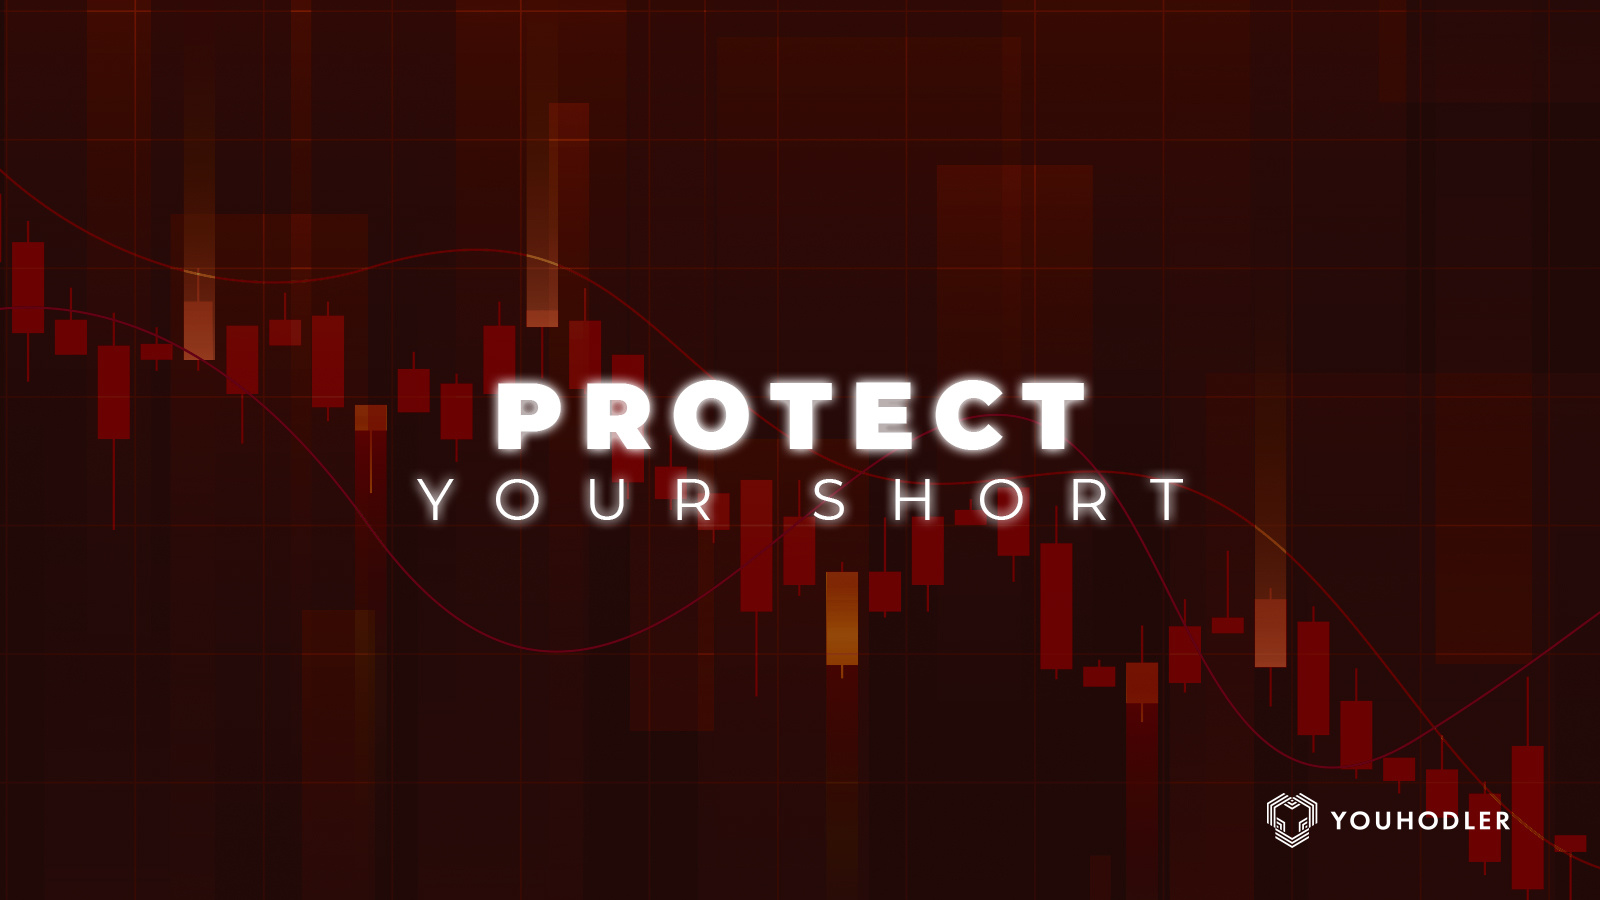 Bitcoin Trading Tips: Learn How to Protect Your Short and Benefit 